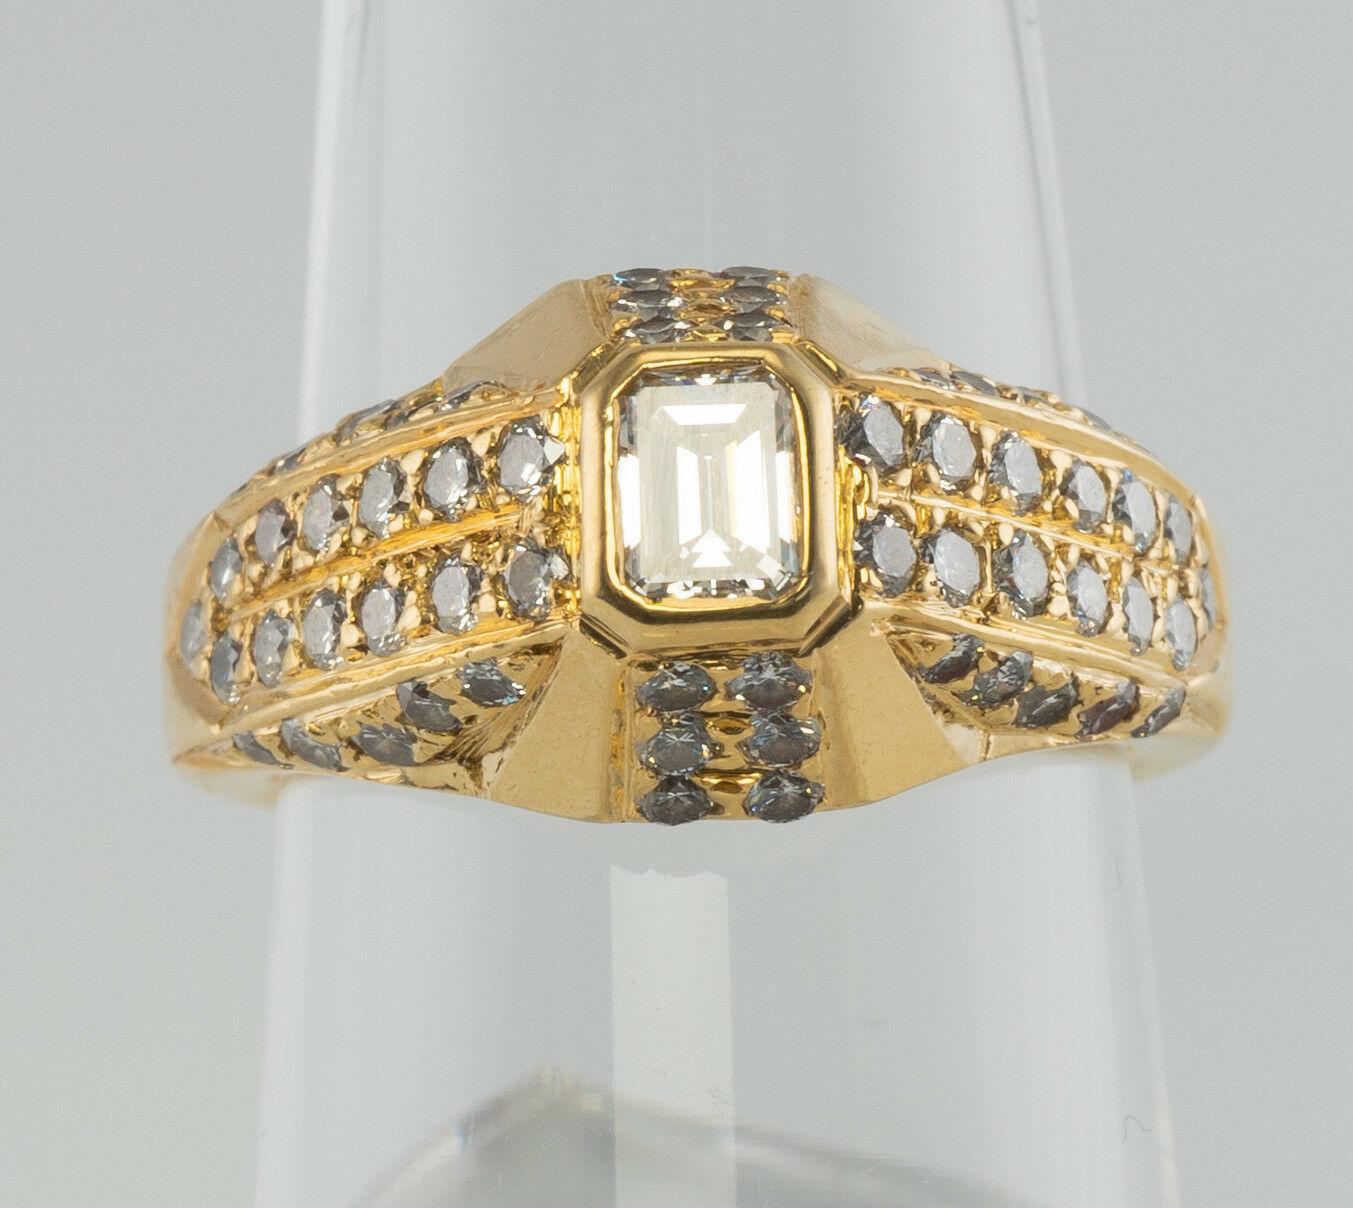 This stunning estate piece is finely crafted in solid 18K gold and set with wonderful whitest diamonds. The band is hallmarked with T inside C. The center emerald cut gem measures 4mm x 3mm (.19 carat). Fifty-eight round brilliant cut diamonds add